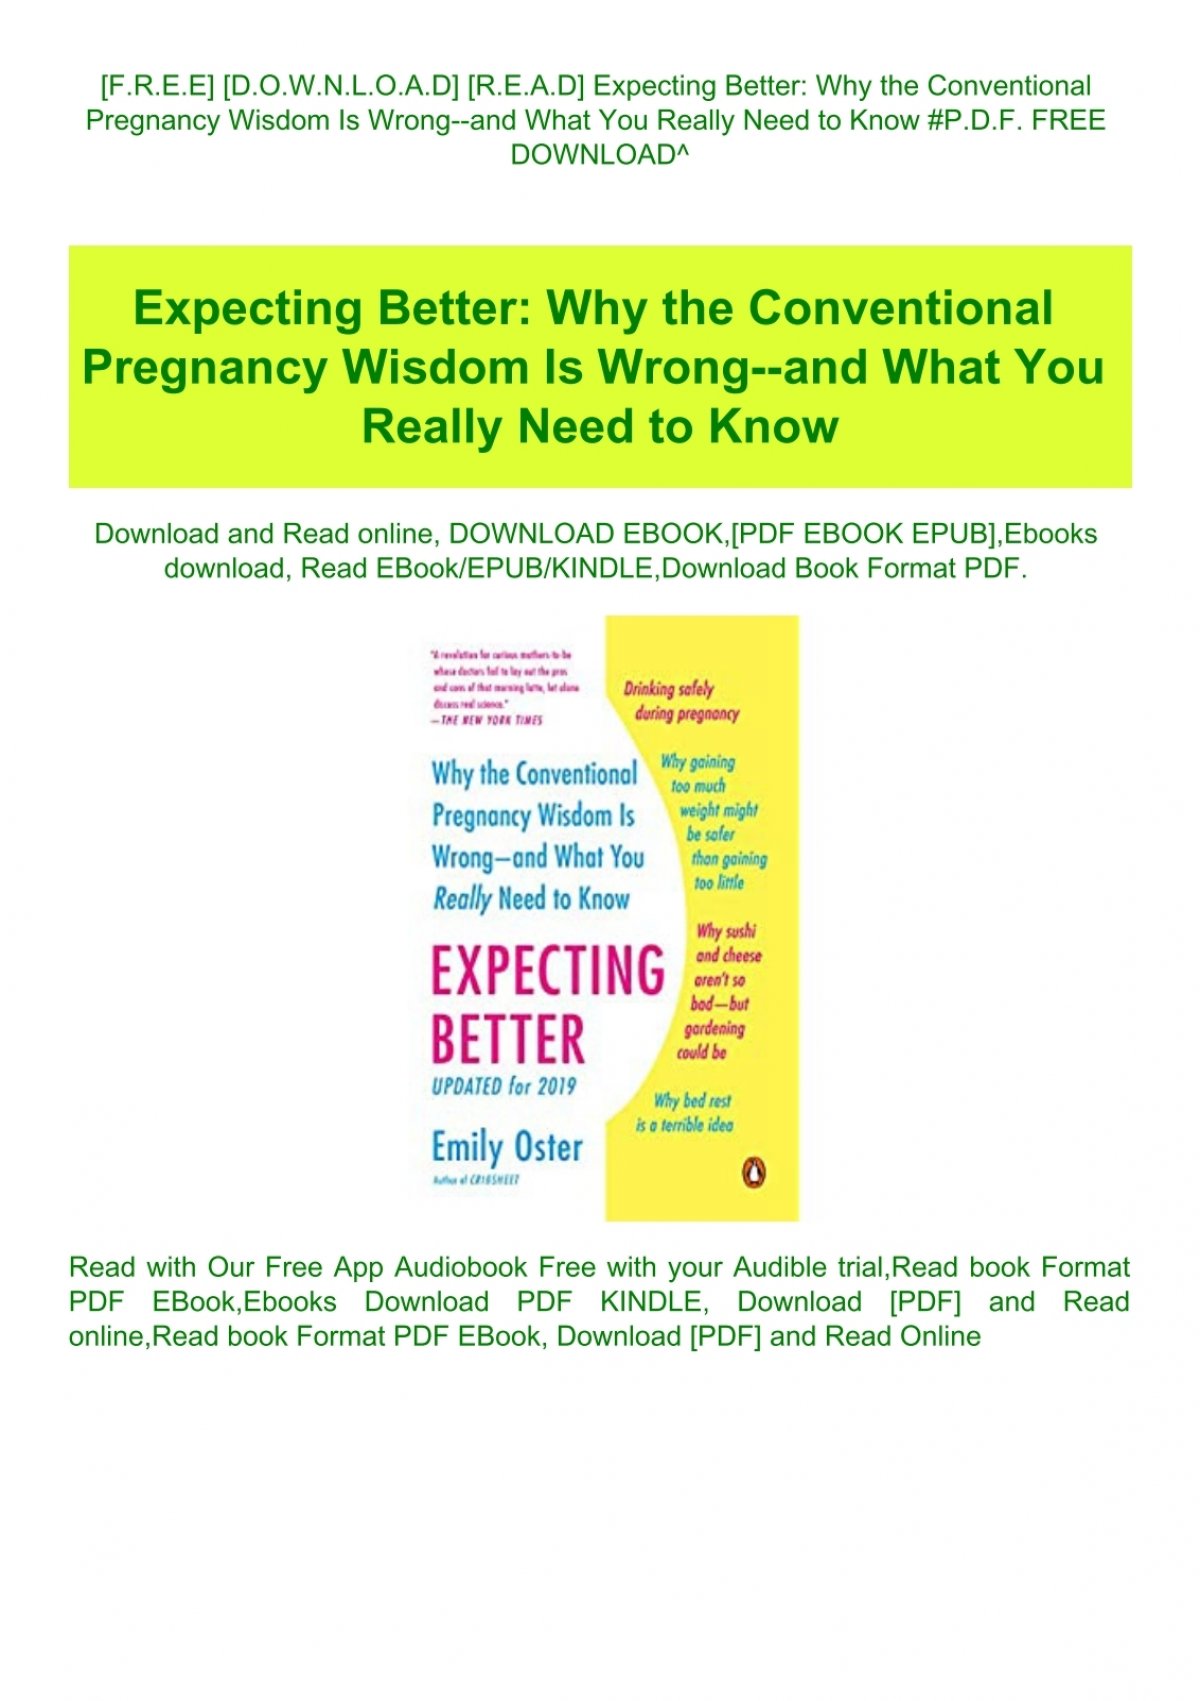 F R E E D O W N L O A D R E A D Expecting Better Why The Conventional Pregnancy Wisdom Is Wrong And What You Really Need To Know P D F Free Download